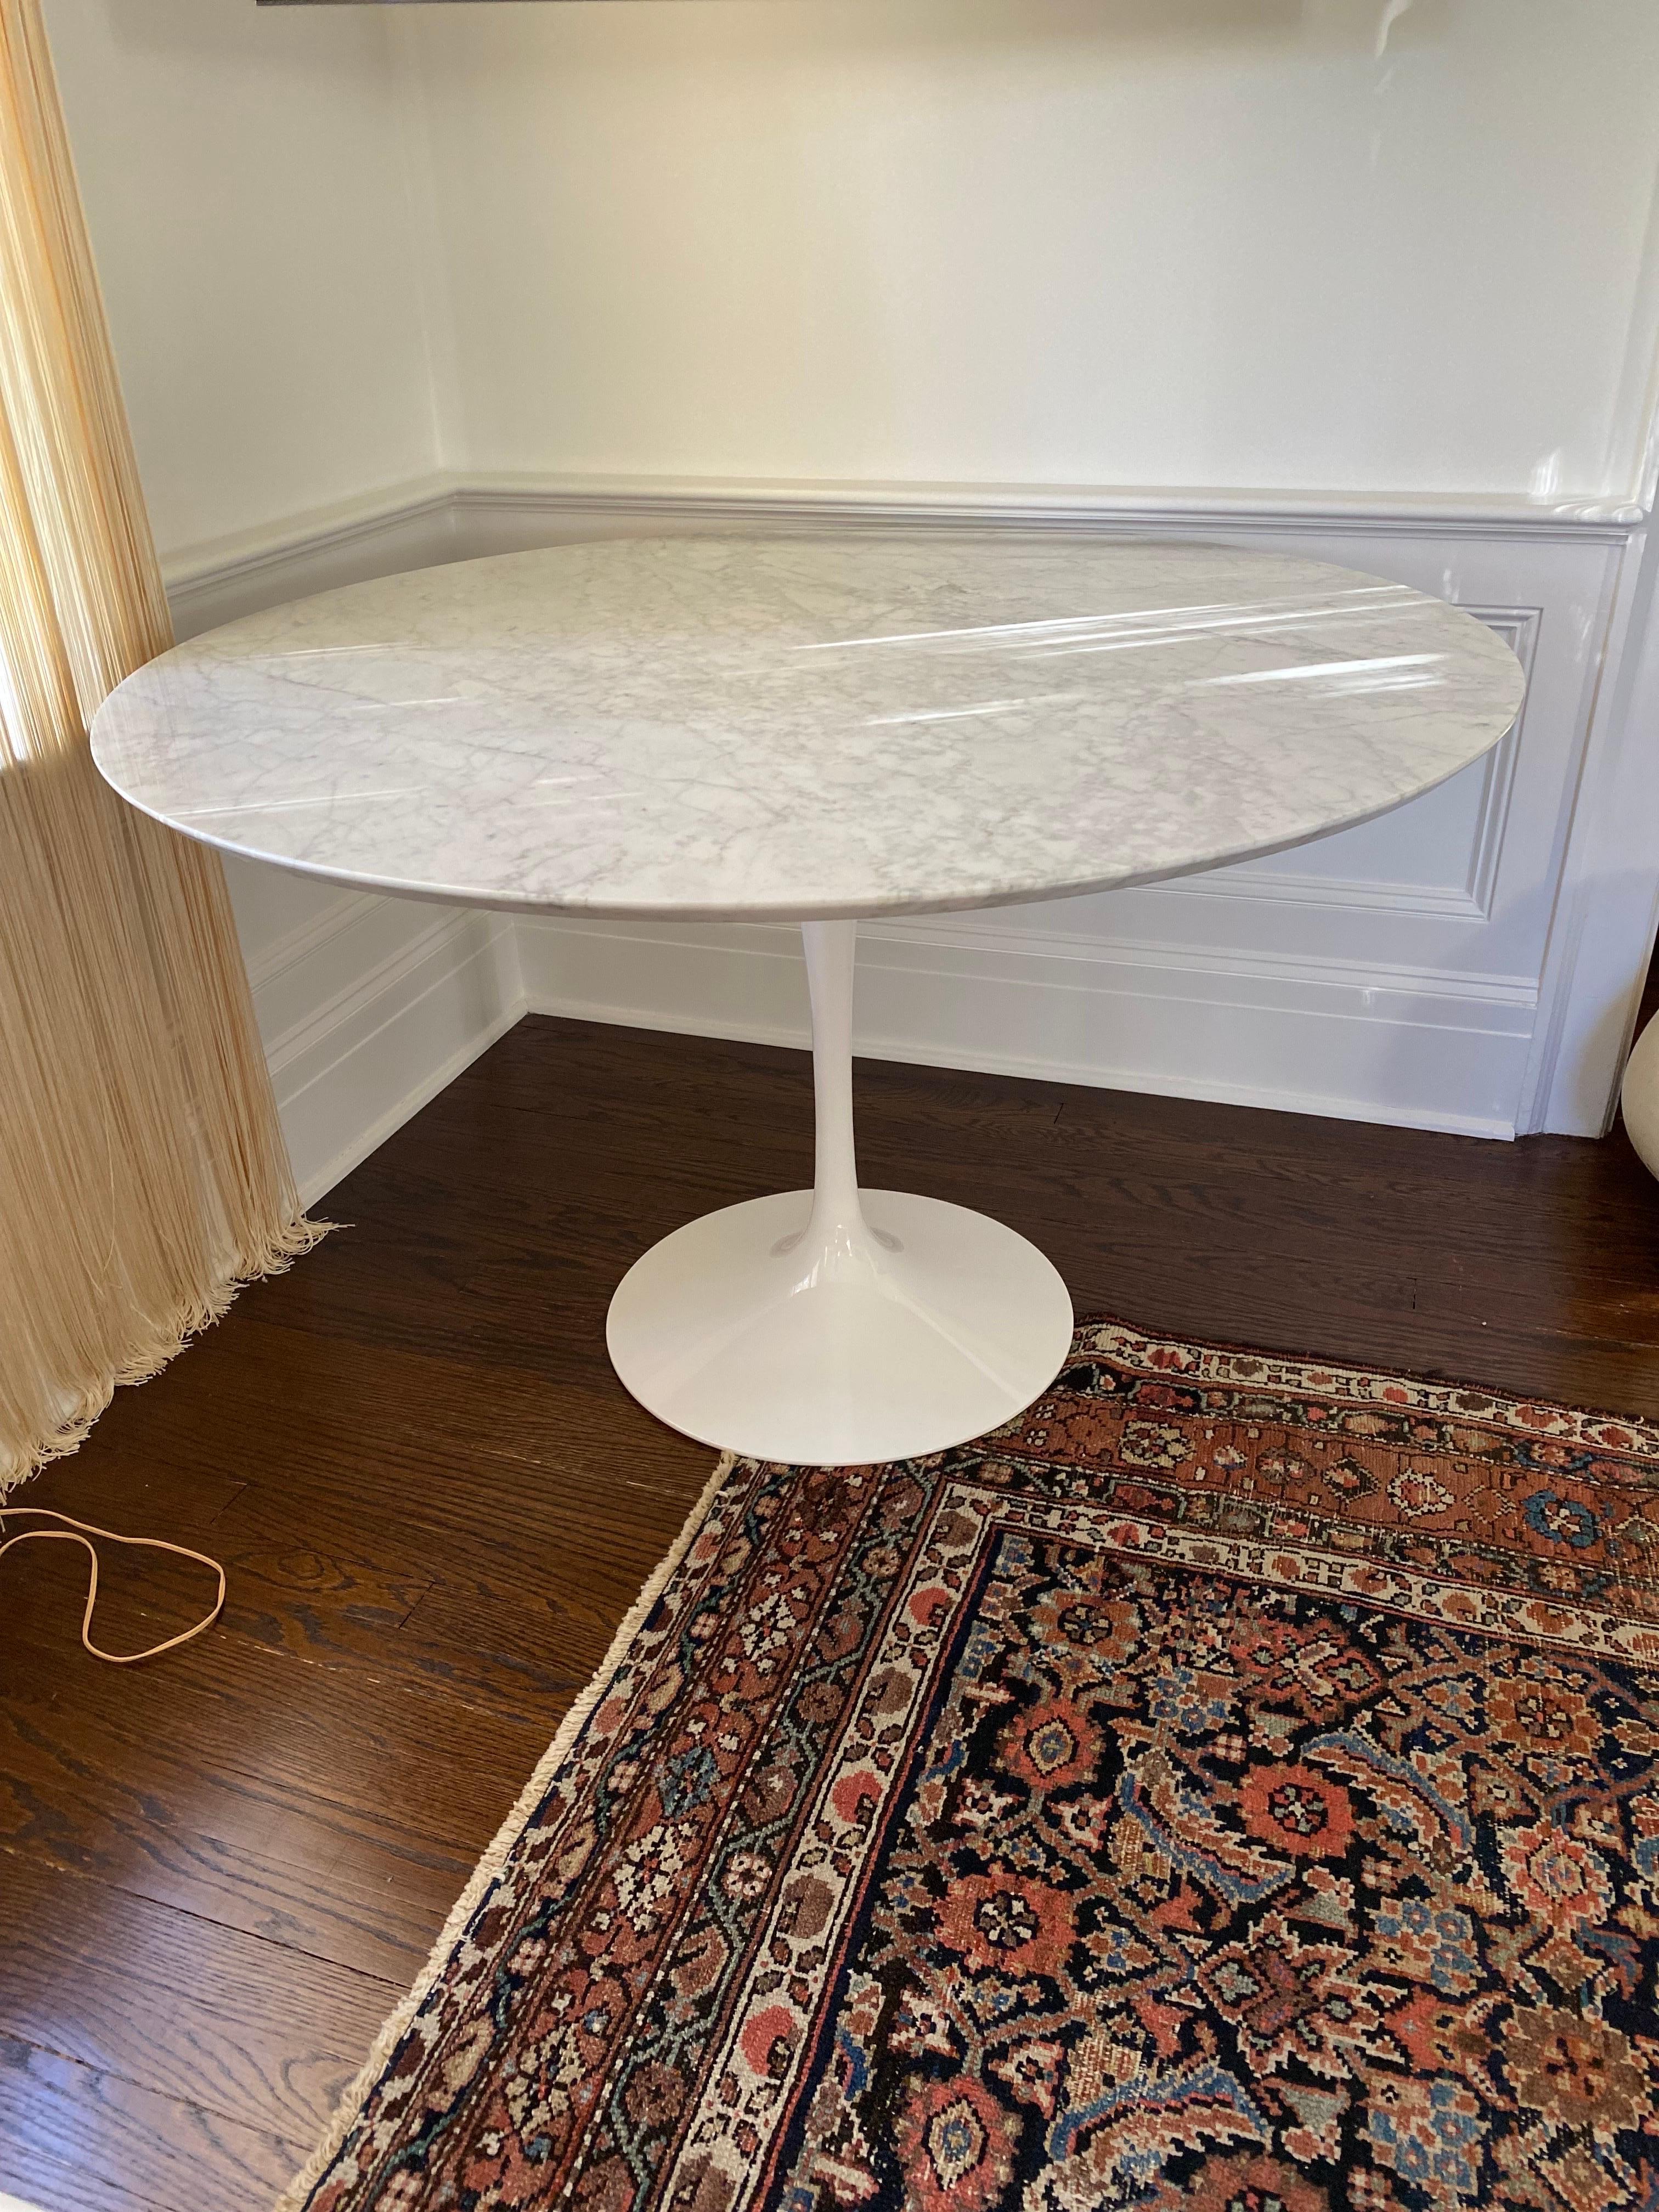 Saarinen Style Tulip Table With Carrera Marble Top (with chip).
The classic Saarinen Tulip Table in white steel base, unmarked so suggested in the style of.  Beautiful carrera marble top, one chip on edge, otherwise light wear throughout.

47.38